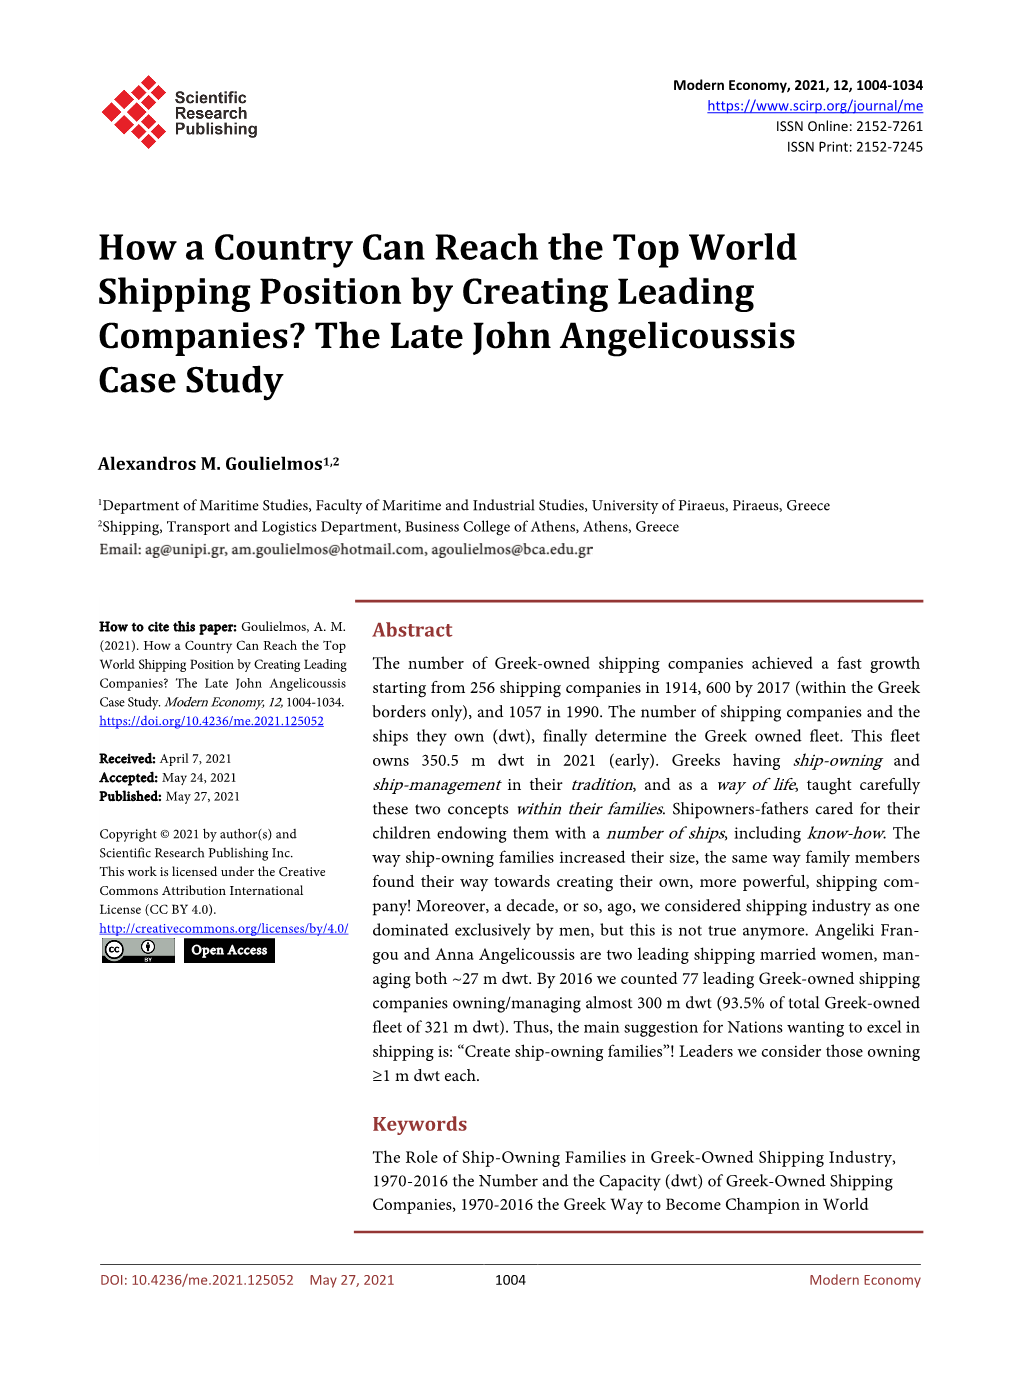 How a Country Can Reach the Top World Shipping Position by Creating Leading Companies? the Late John Angelicoussis Case Study